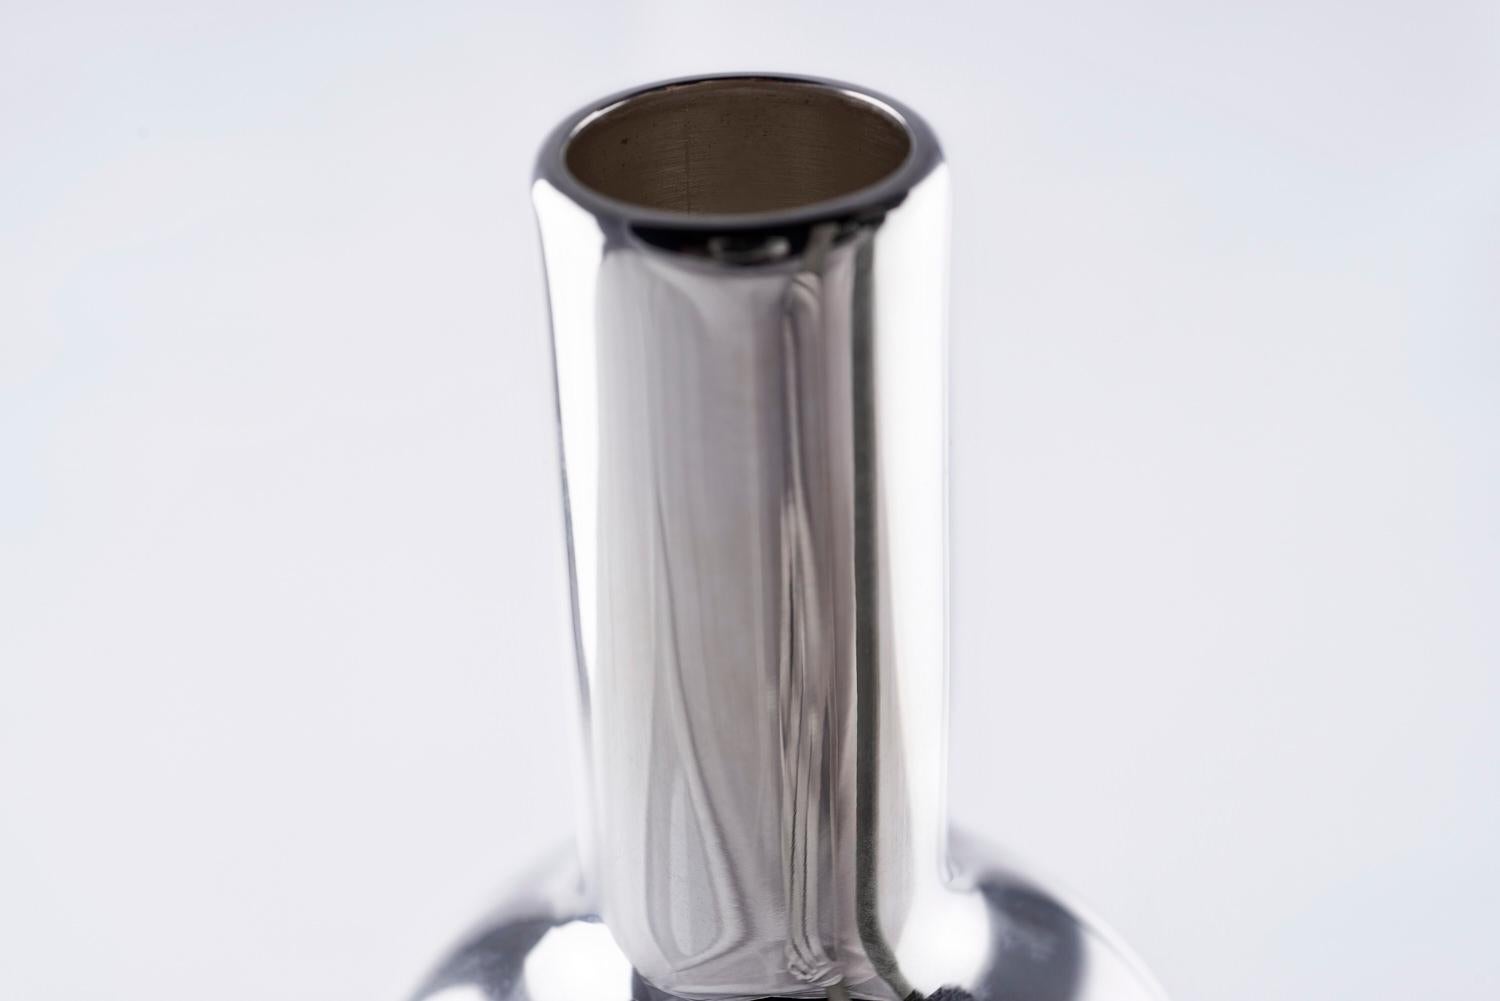 K-Over wine Silver
Our K-OVERs, are alternatives to the VINO bucket and the more common glacette.  The precious metal that holds the bottle is coated internally with a thermal fabric that maintains the temperature of your wine for about 2 hours. The